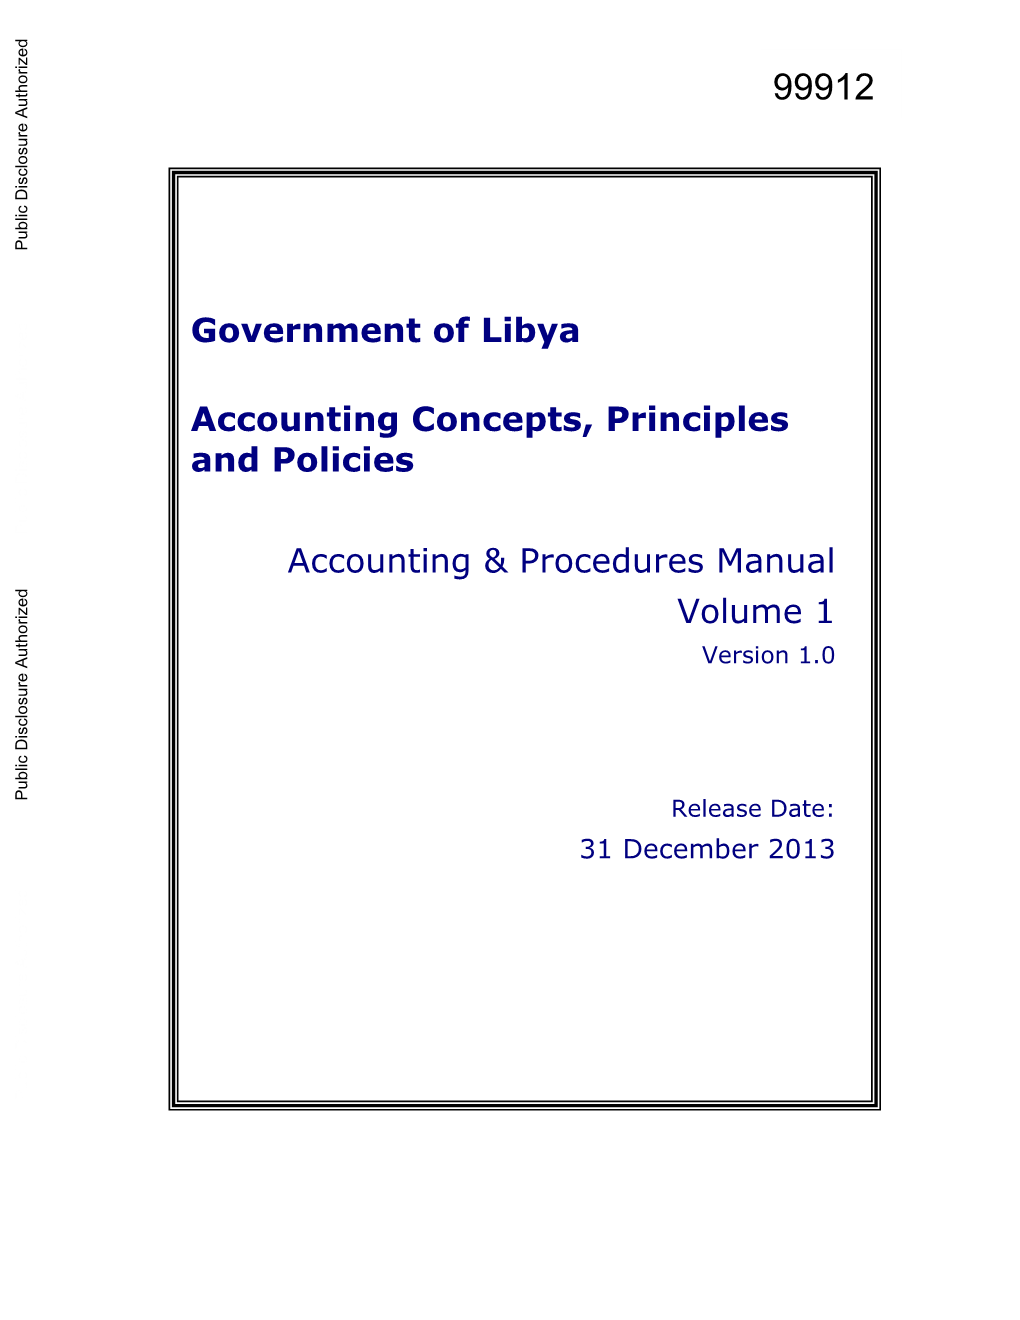 Government of Libya Accounting Concepts, Principles and Policies Accounting & Procedures Manual Volume 1